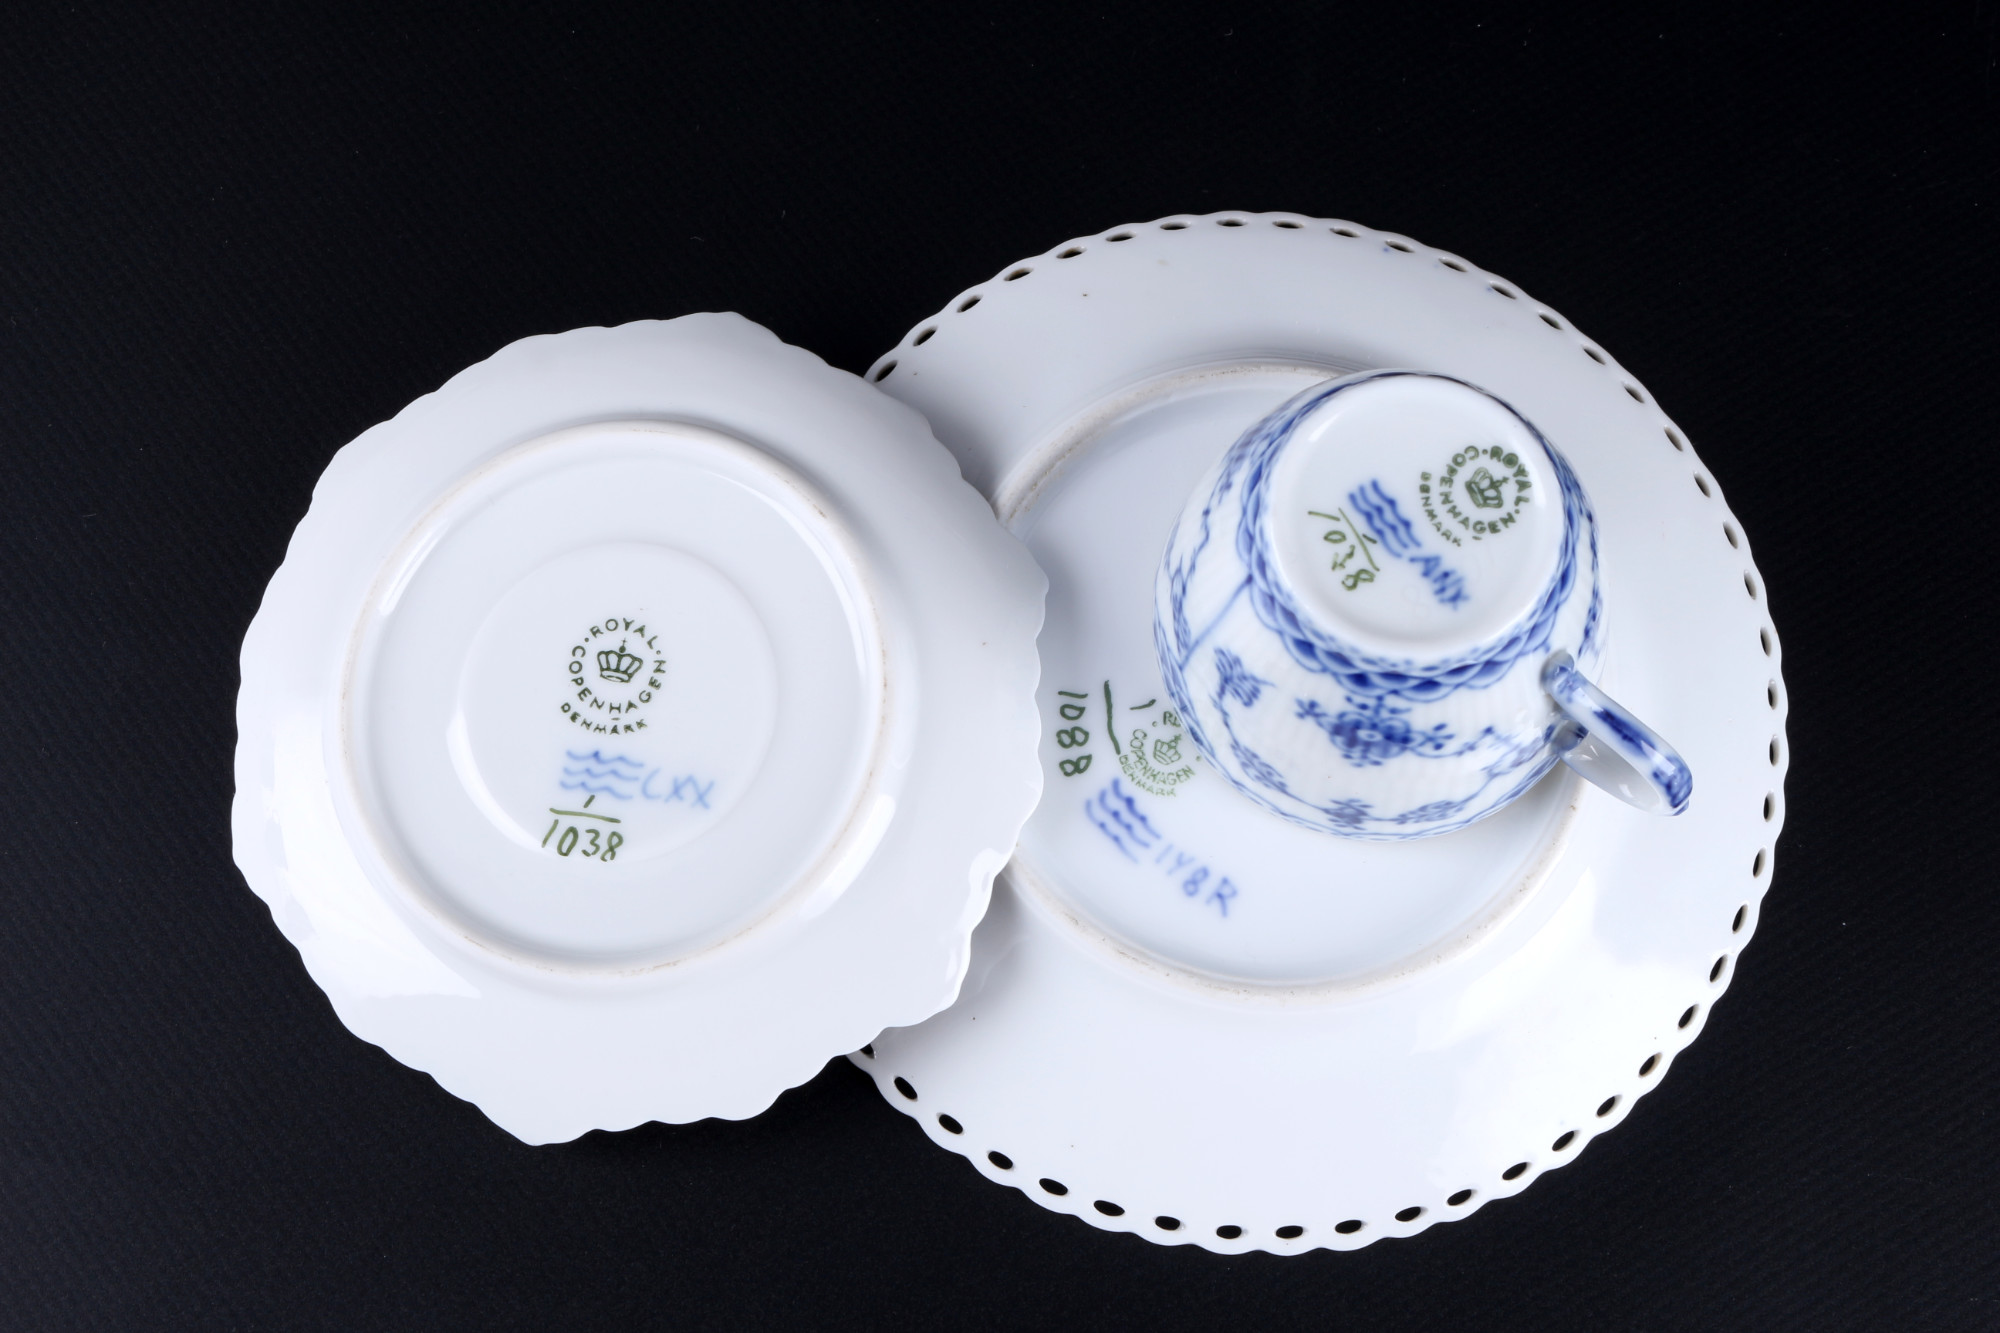 Royal Copenhagen Musselmalet Full Lace 6 mocha coffee cups with dessert plates 1038/1088 1st choice - Image 3 of 3